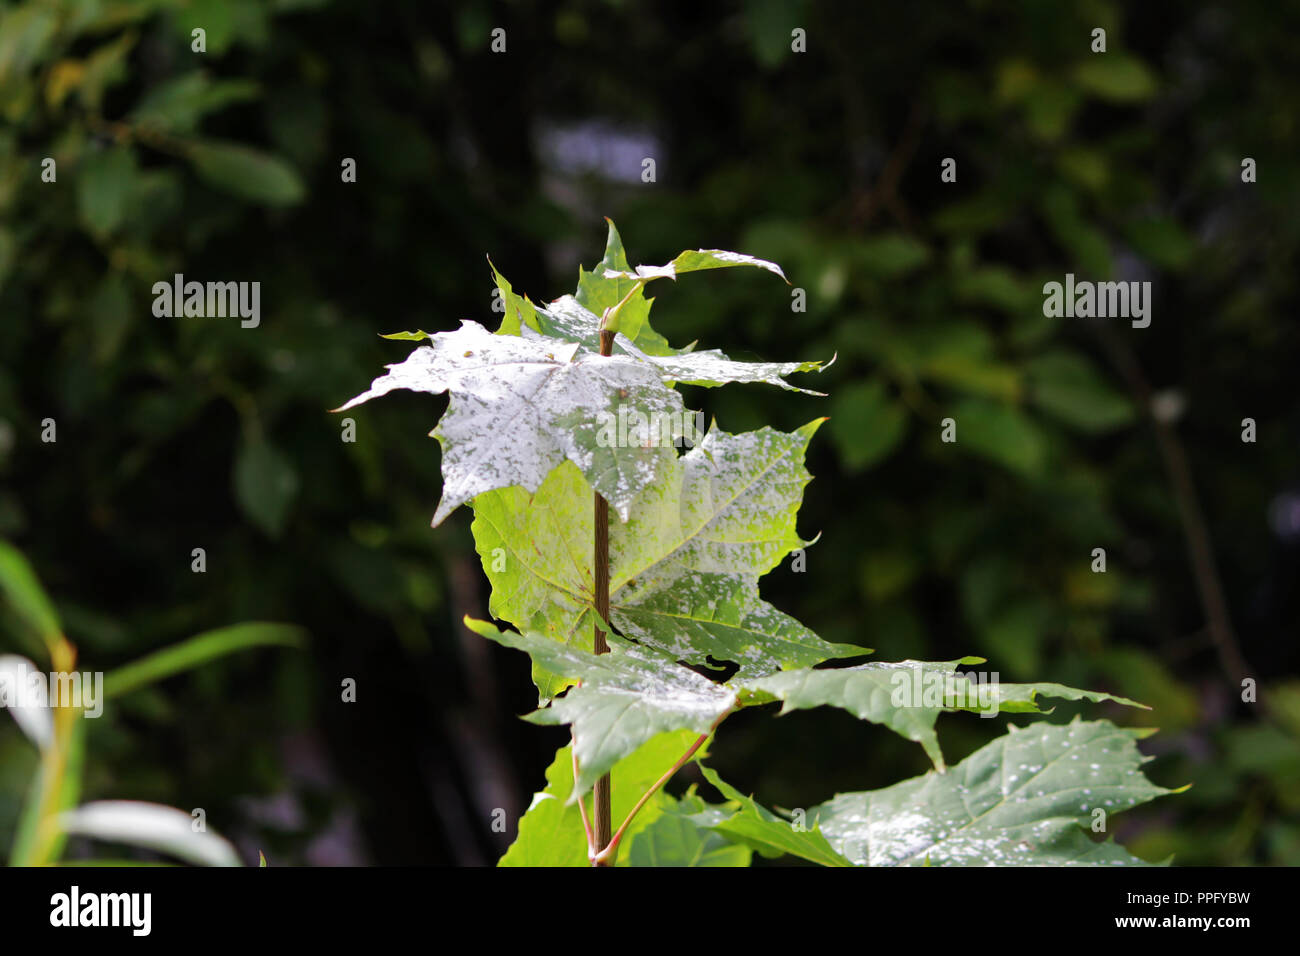 powdery mildew in the form of white spots cover the leaves of young maple. fungal disease of plants. Powdery mildew on Maple. Maple tree fungal diseas Stock Photo